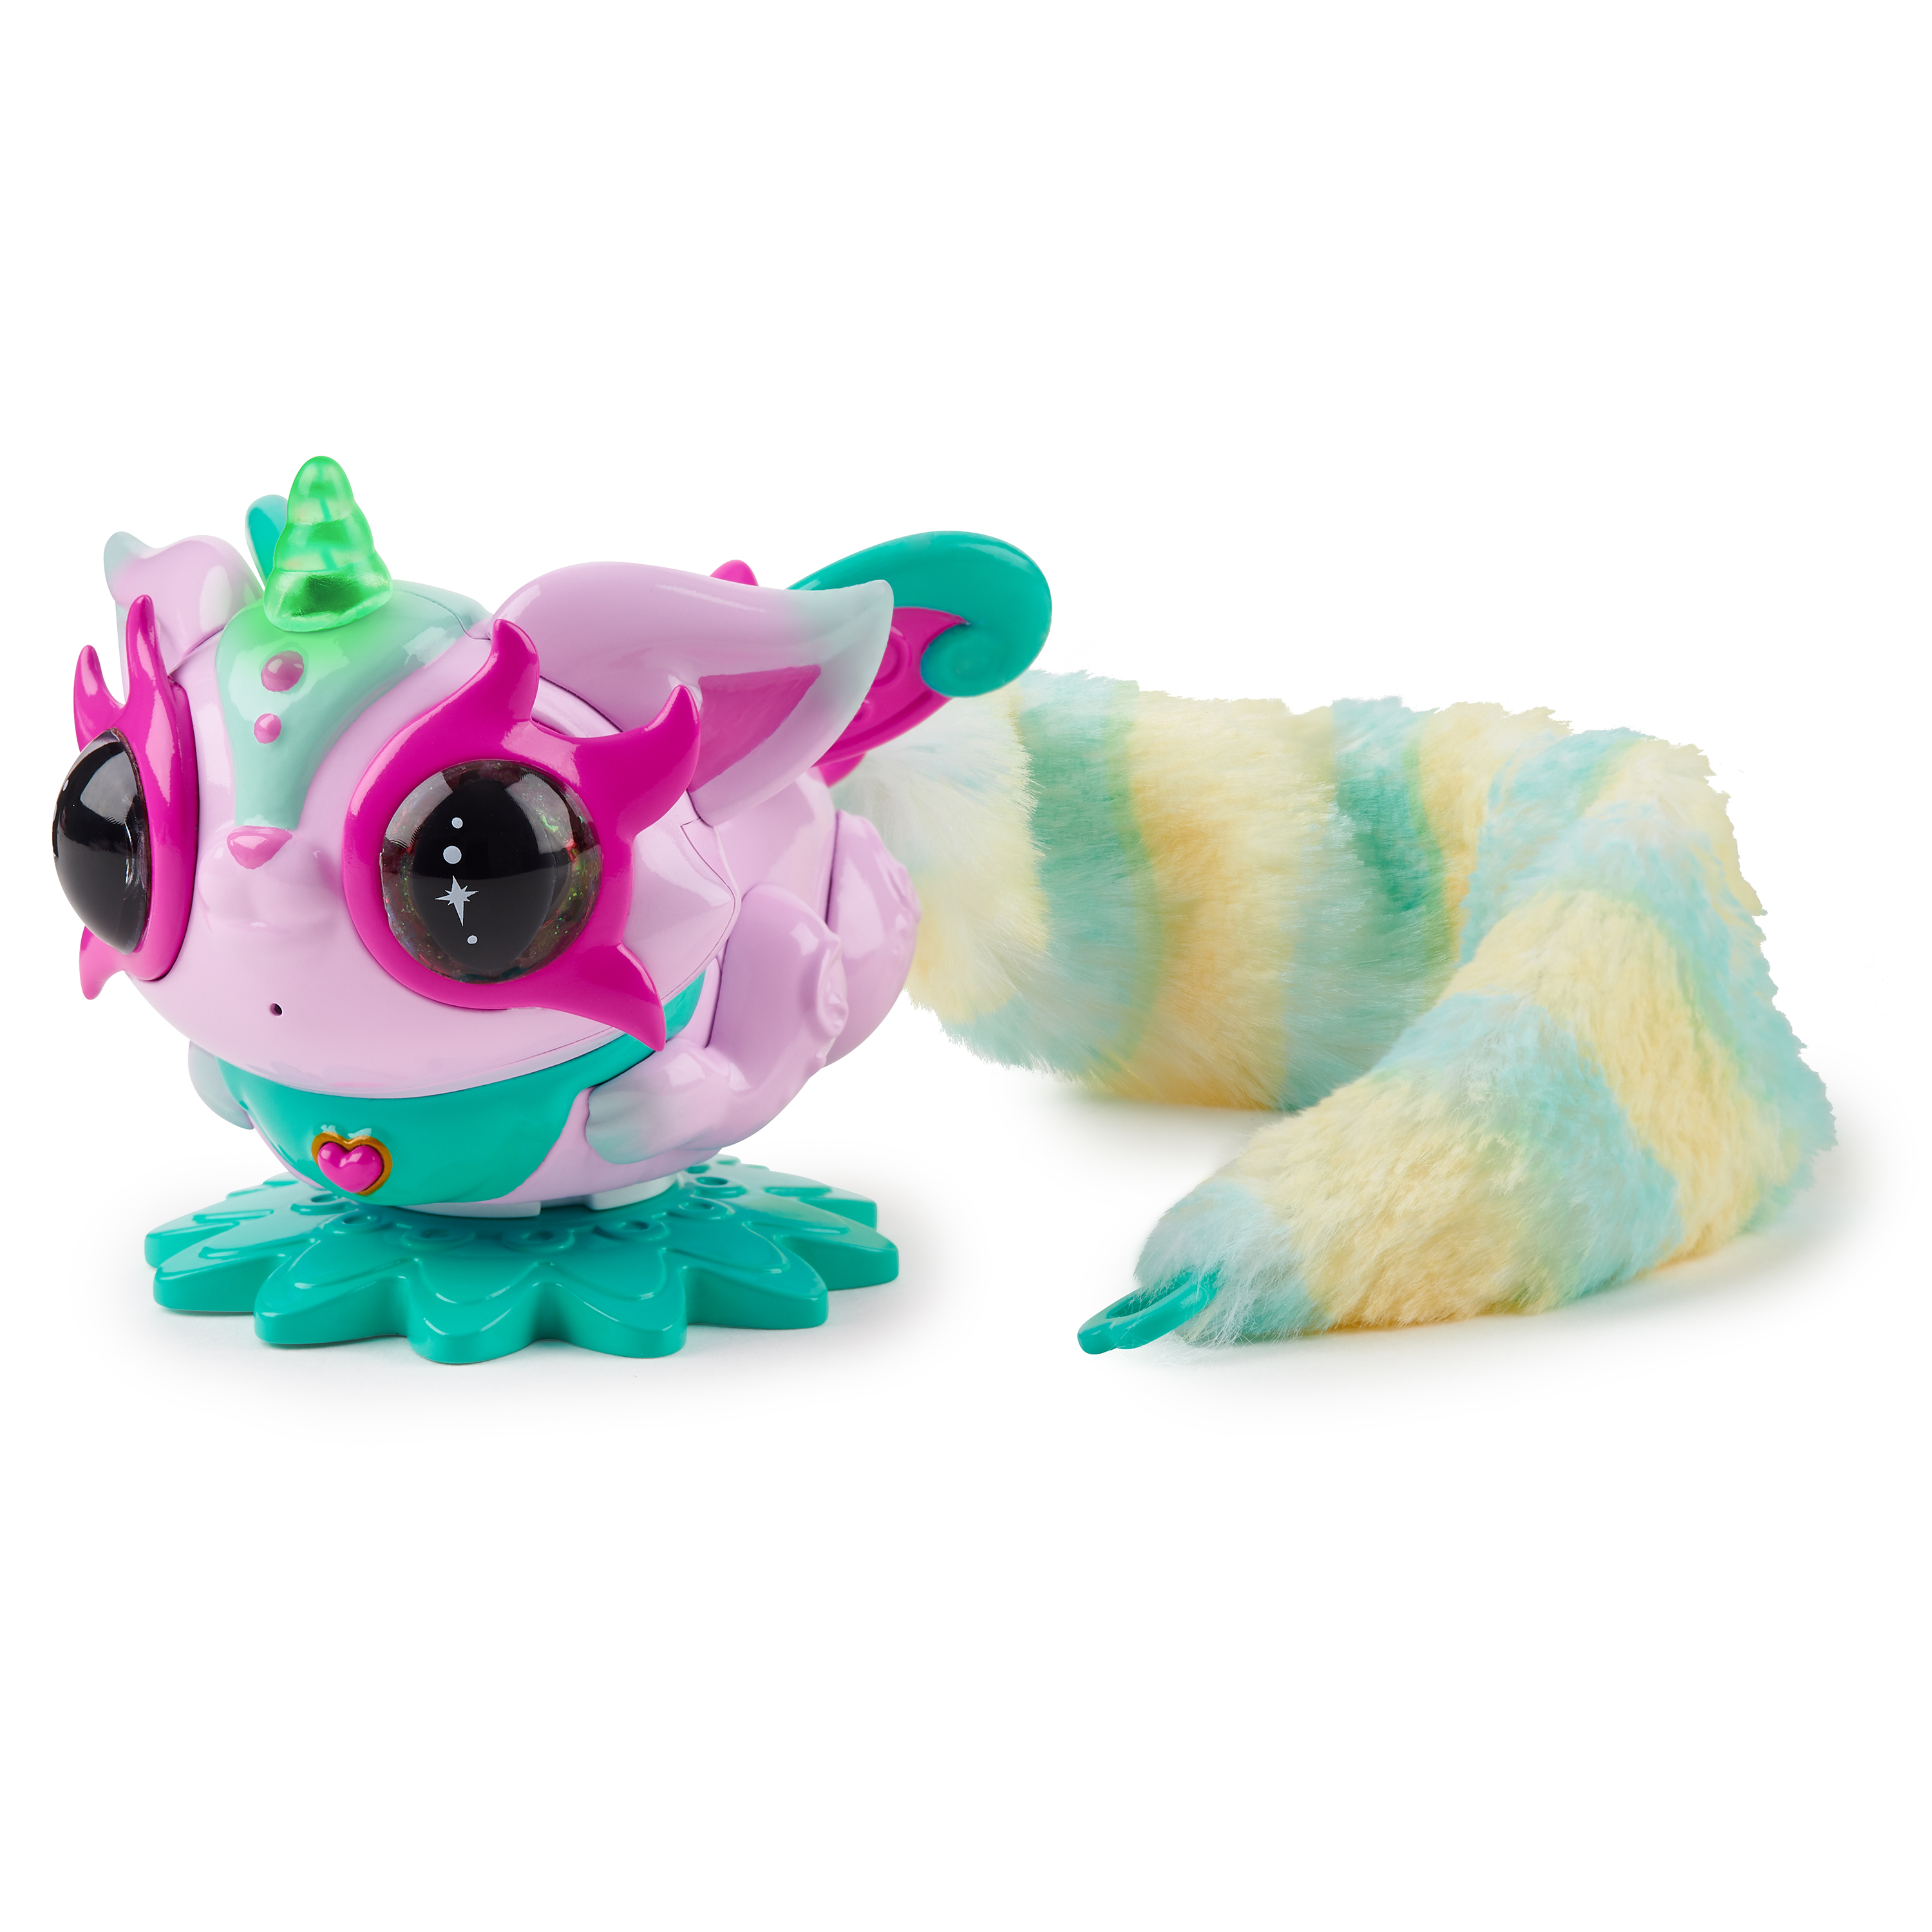 Pixie Belles - Rosie (Pink) - Interactive Electronic Pet with Bonus Tail - image 5 of 7